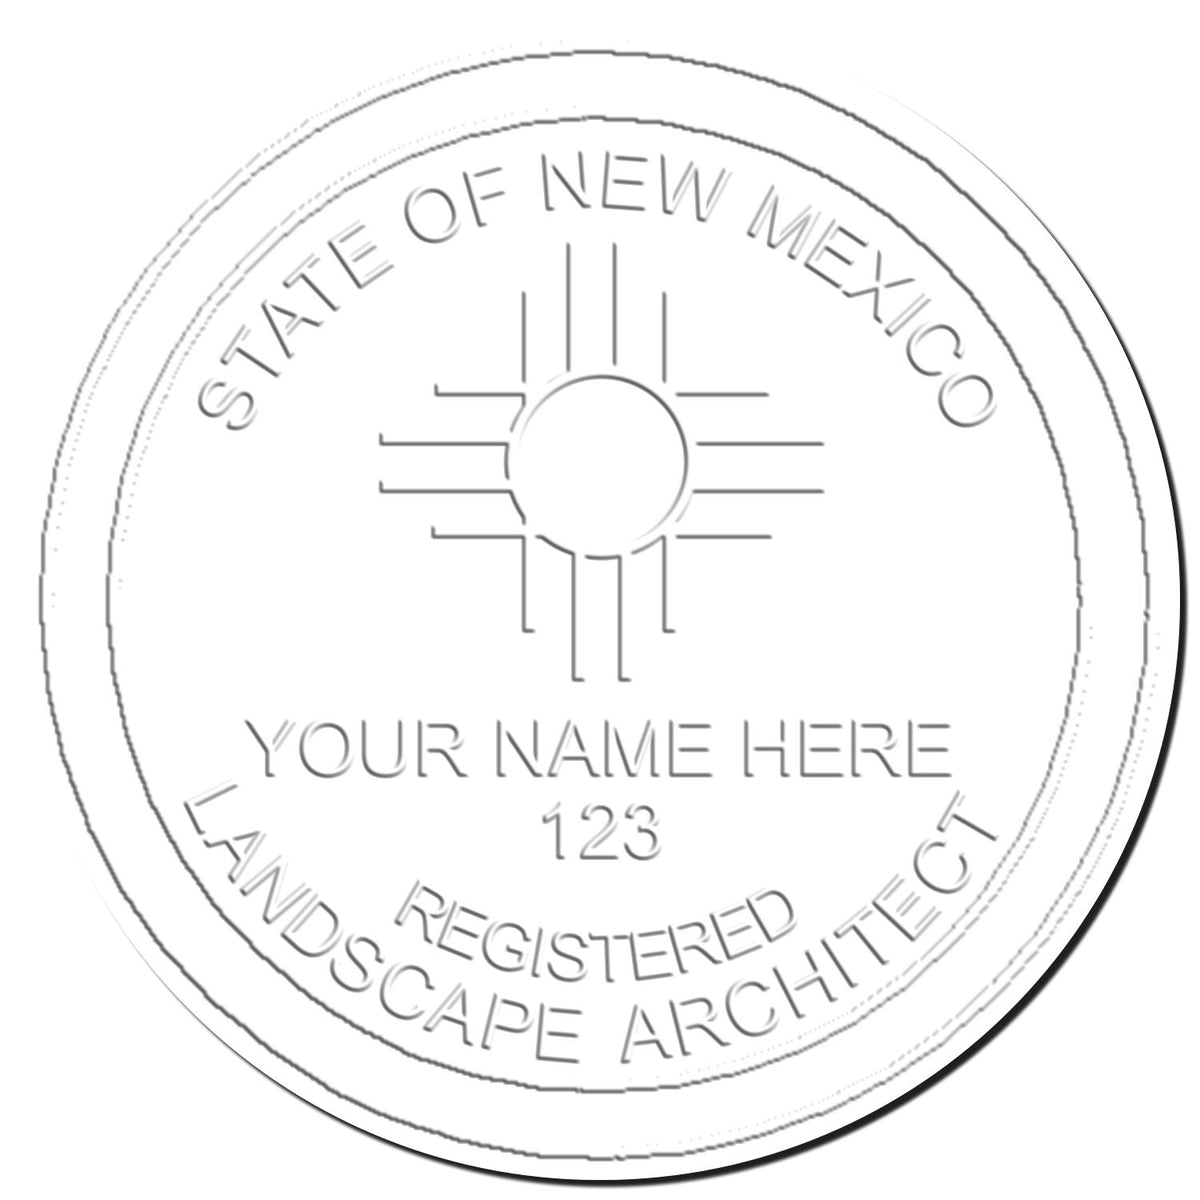 This paper is stamped with a sample imprint of the Soft Pocket New Mexico Landscape Architect Embosser, signifying its quality and reliability.